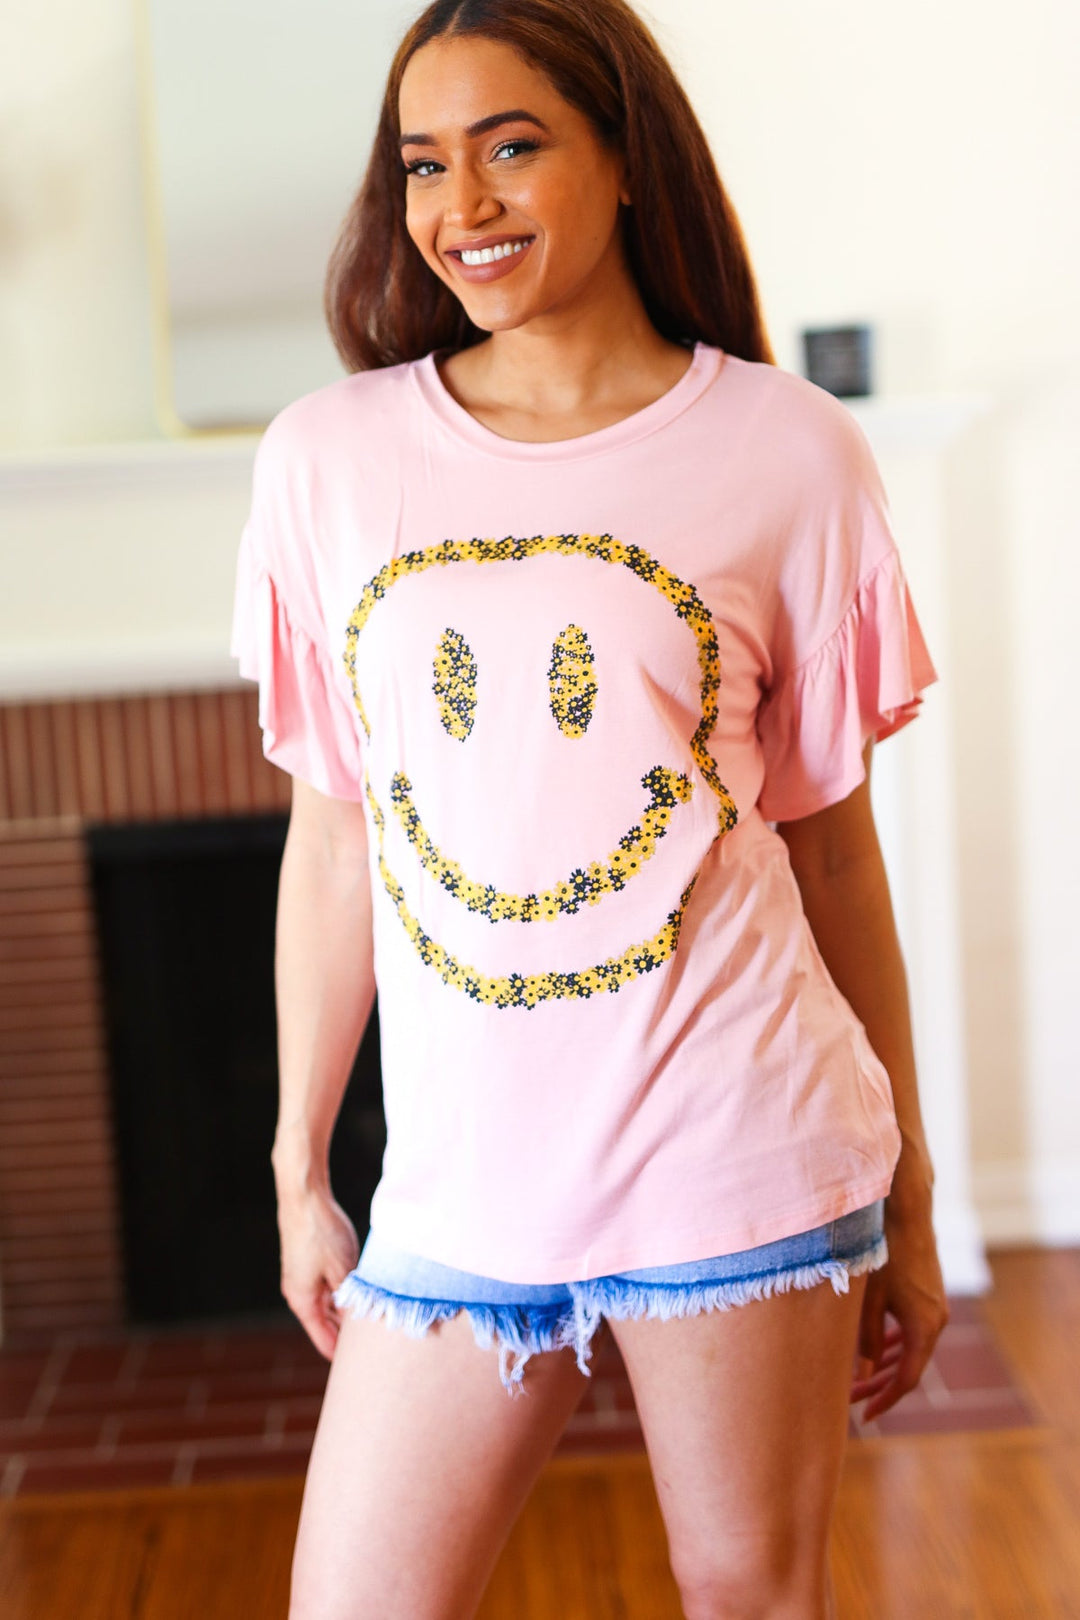 Good Times - Smiley Face Flutter-Sleeve Top - Pink